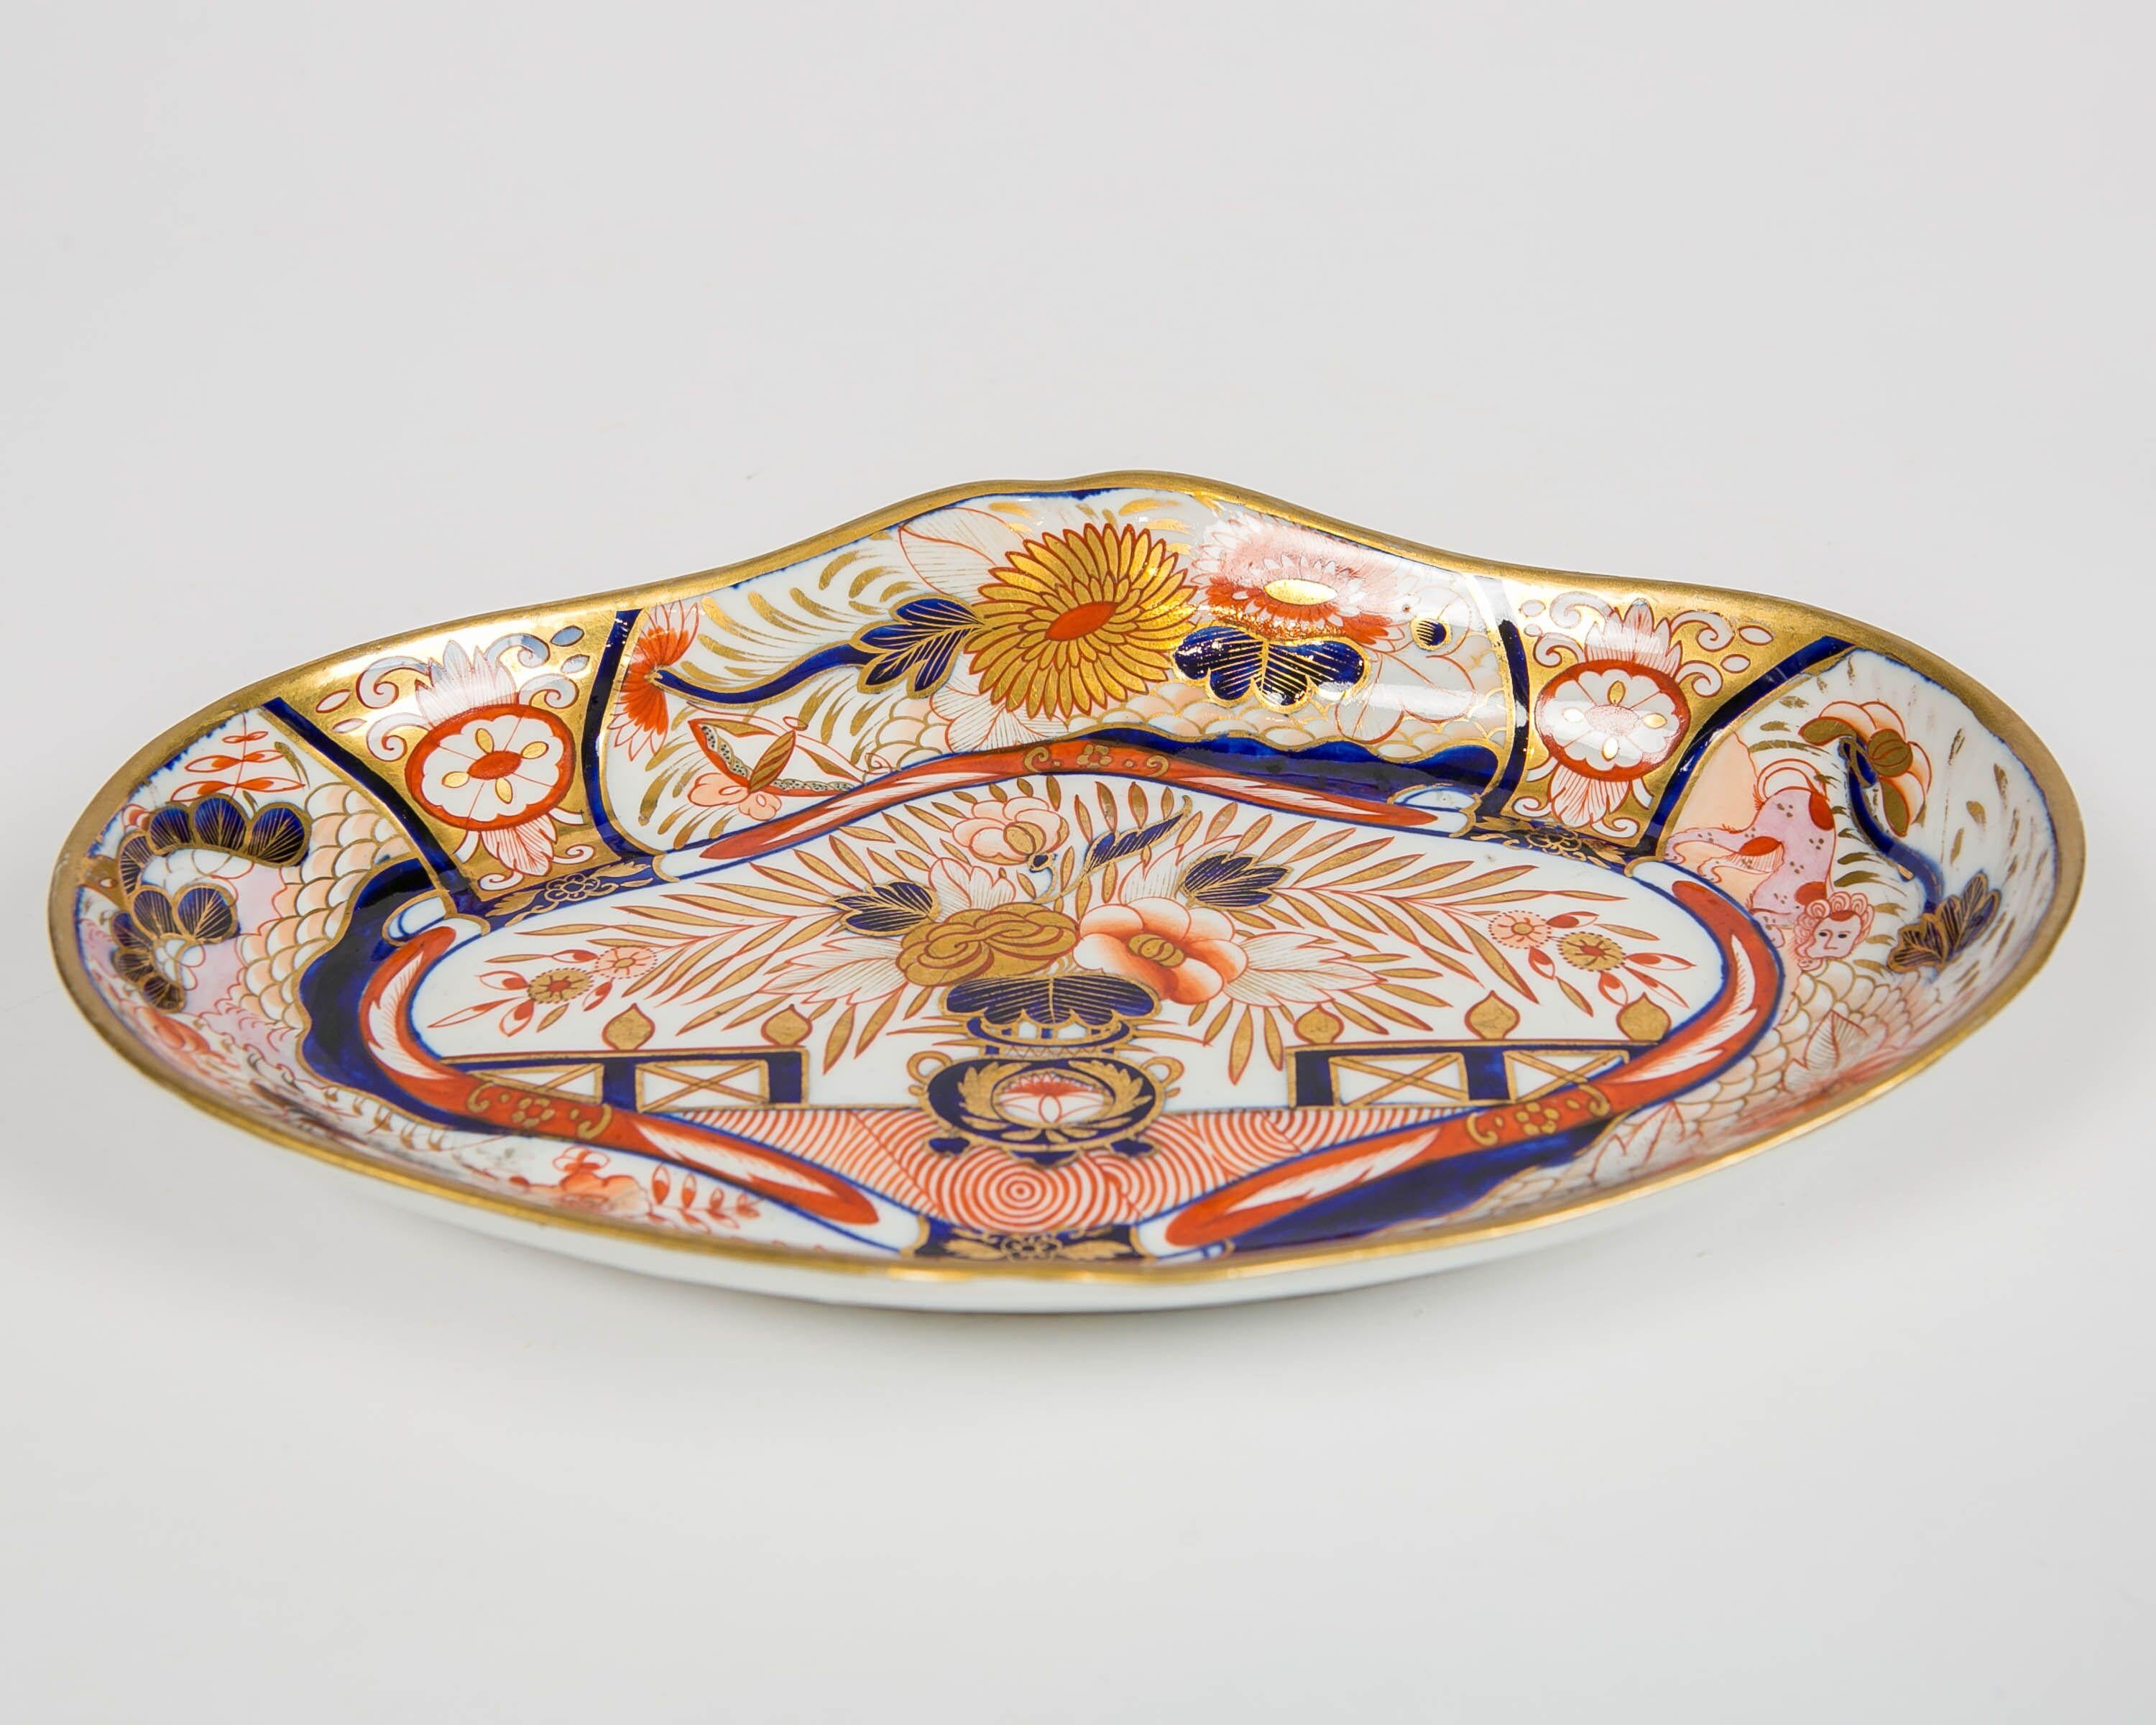 Porcelain Coalport Admiral Nelson Pattern Oval Dishes, England, circa 1810